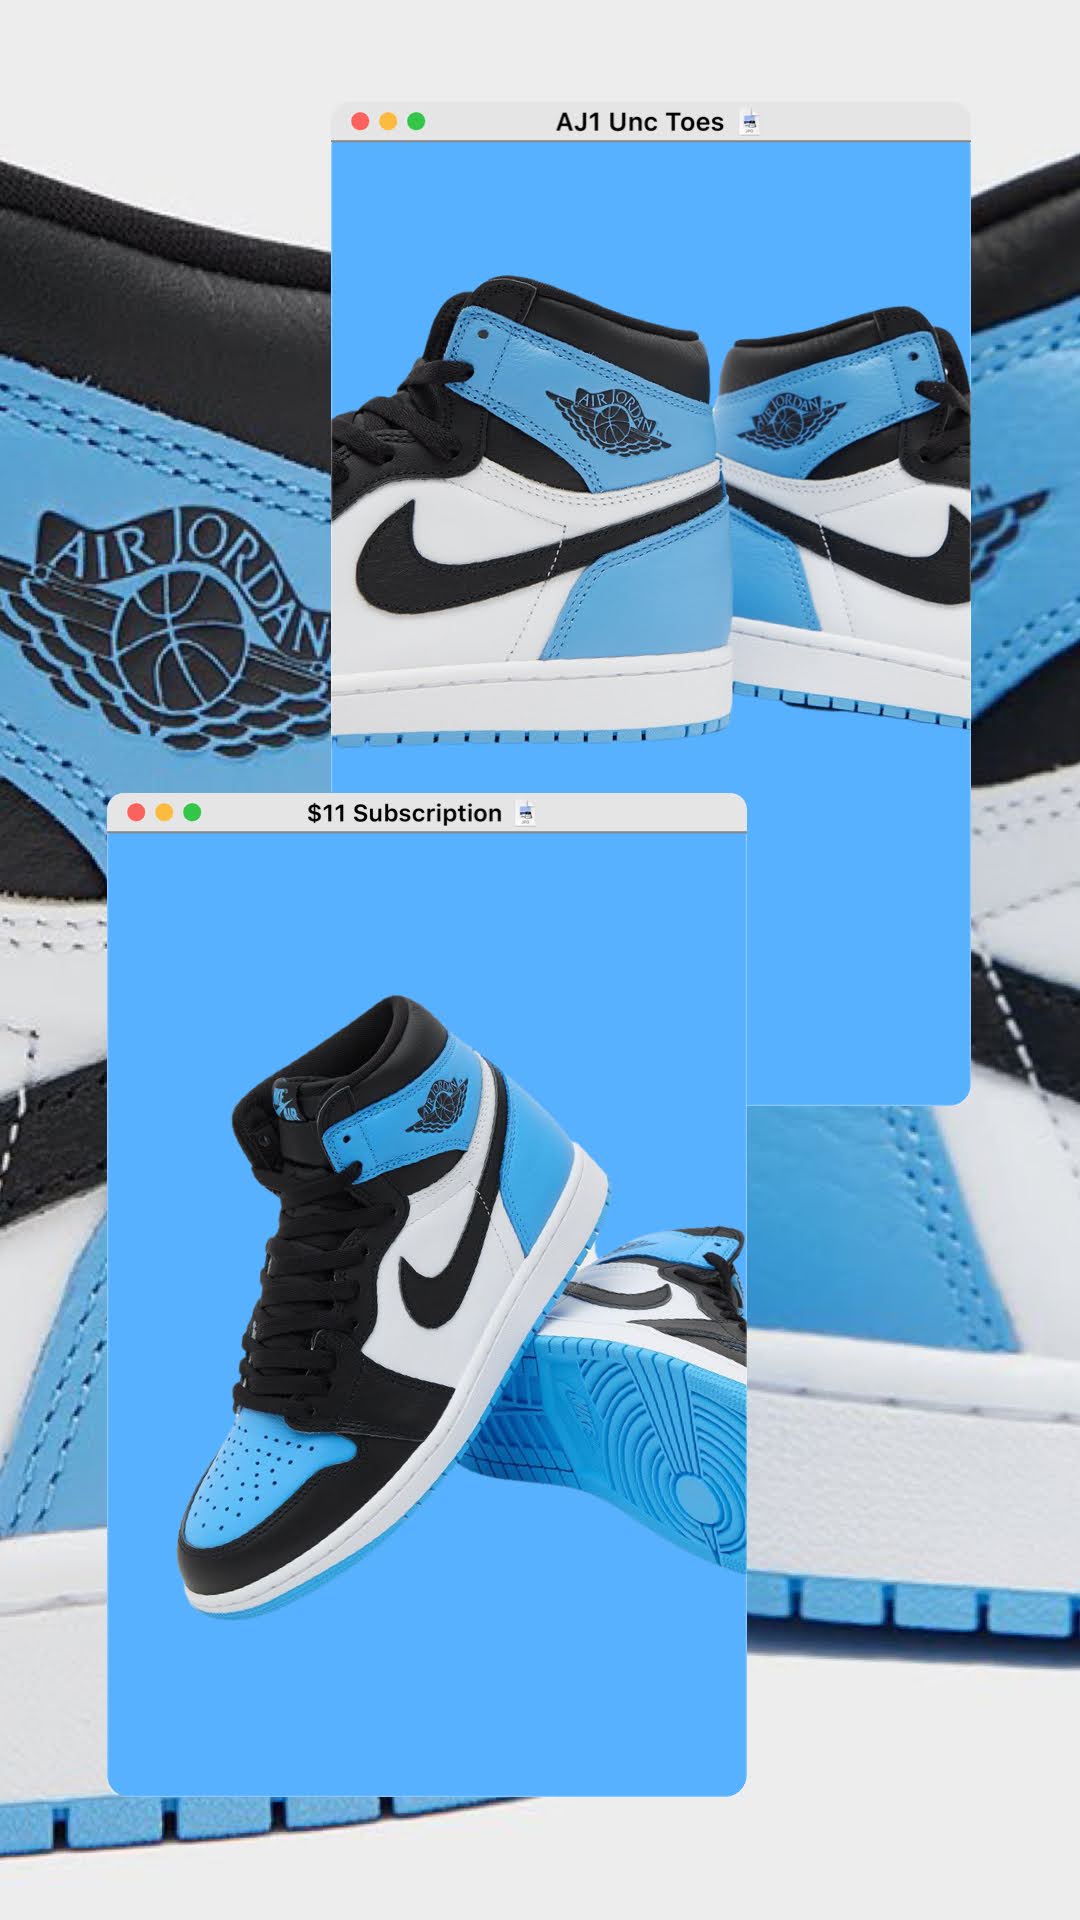 $11 Subscription - Unreleased Air Jordan 1 UNC toes - 4 HOURS ONLY